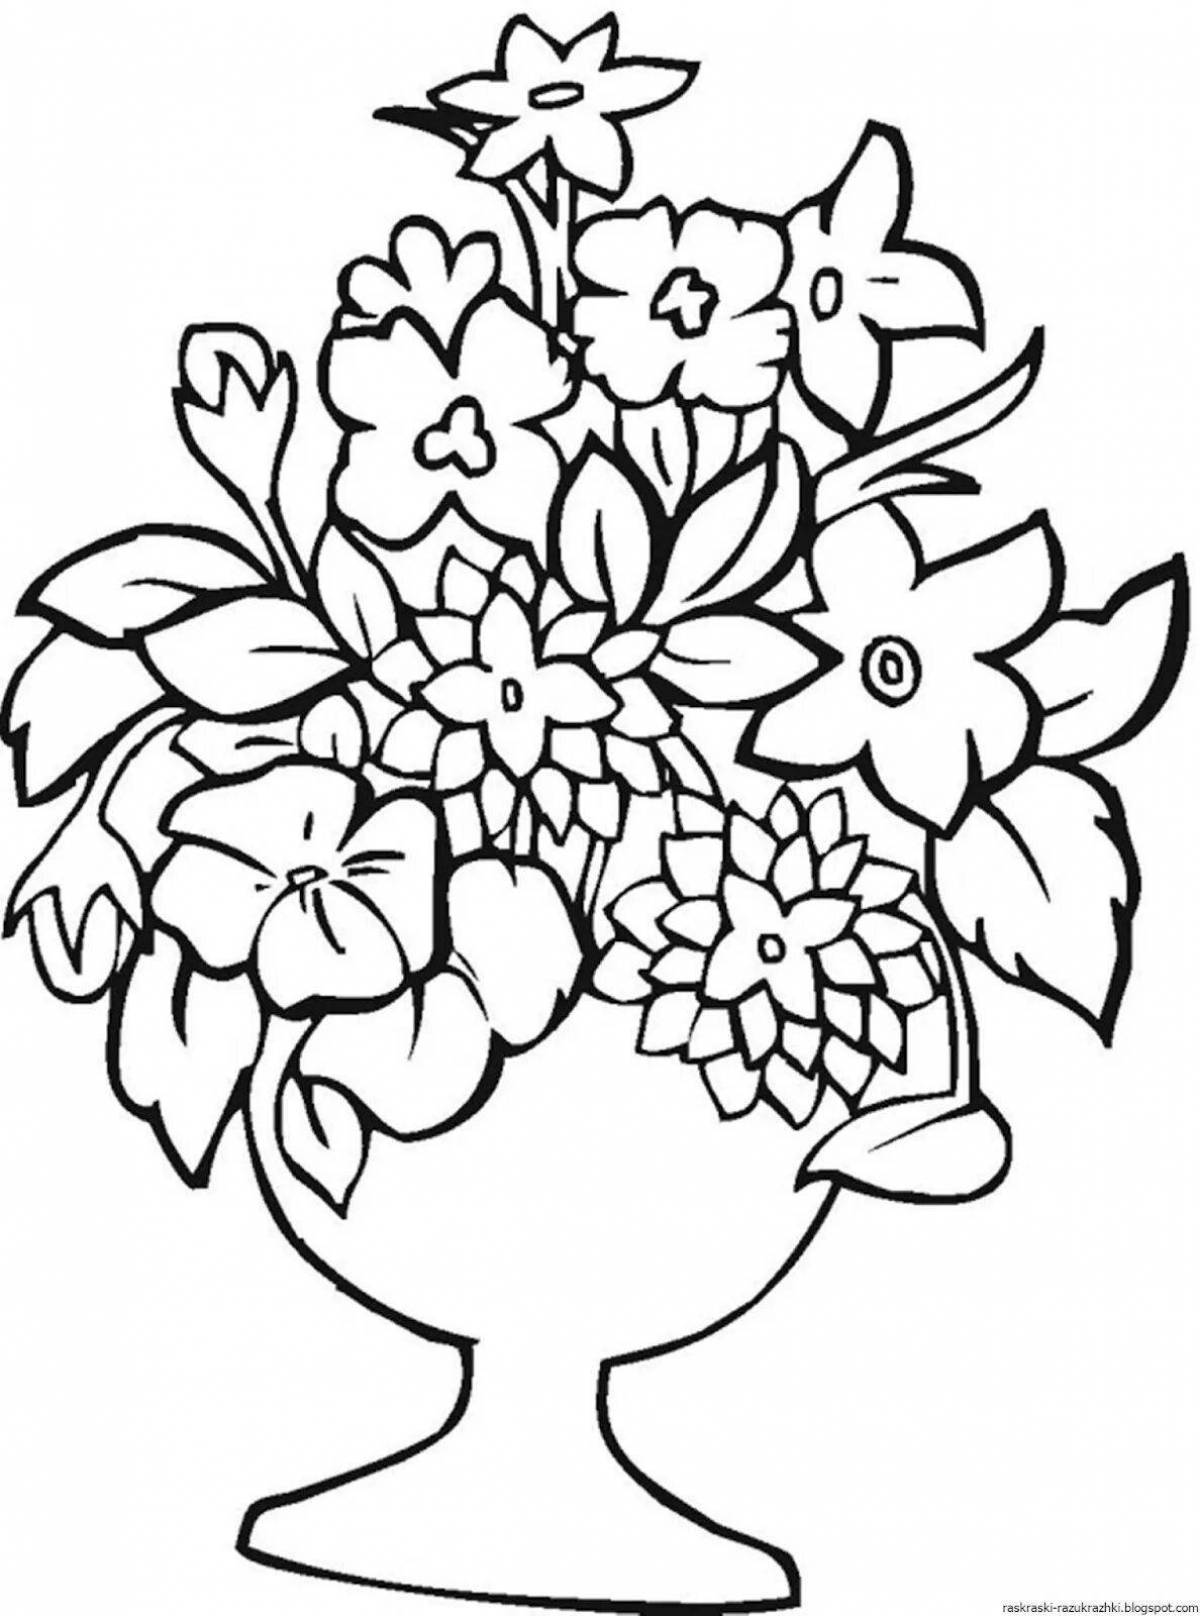 Brightly colored bouquet of flowers in a vase coloring book